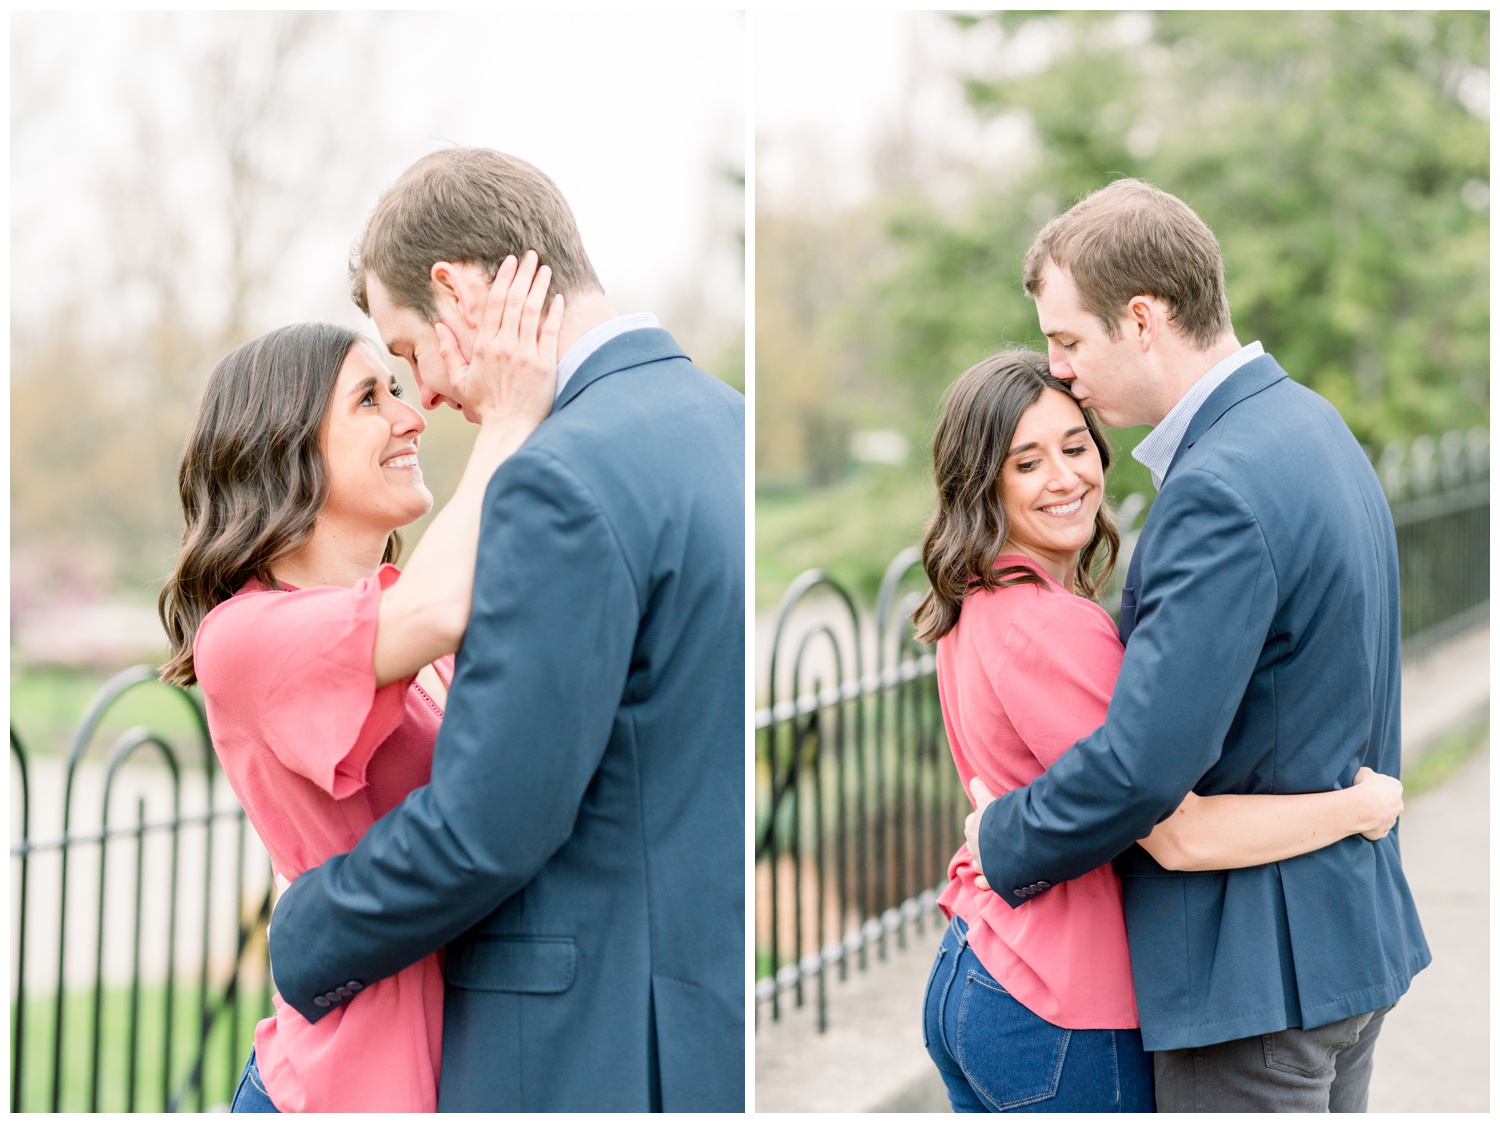 Engaged Couple at Ault Park Cincinati